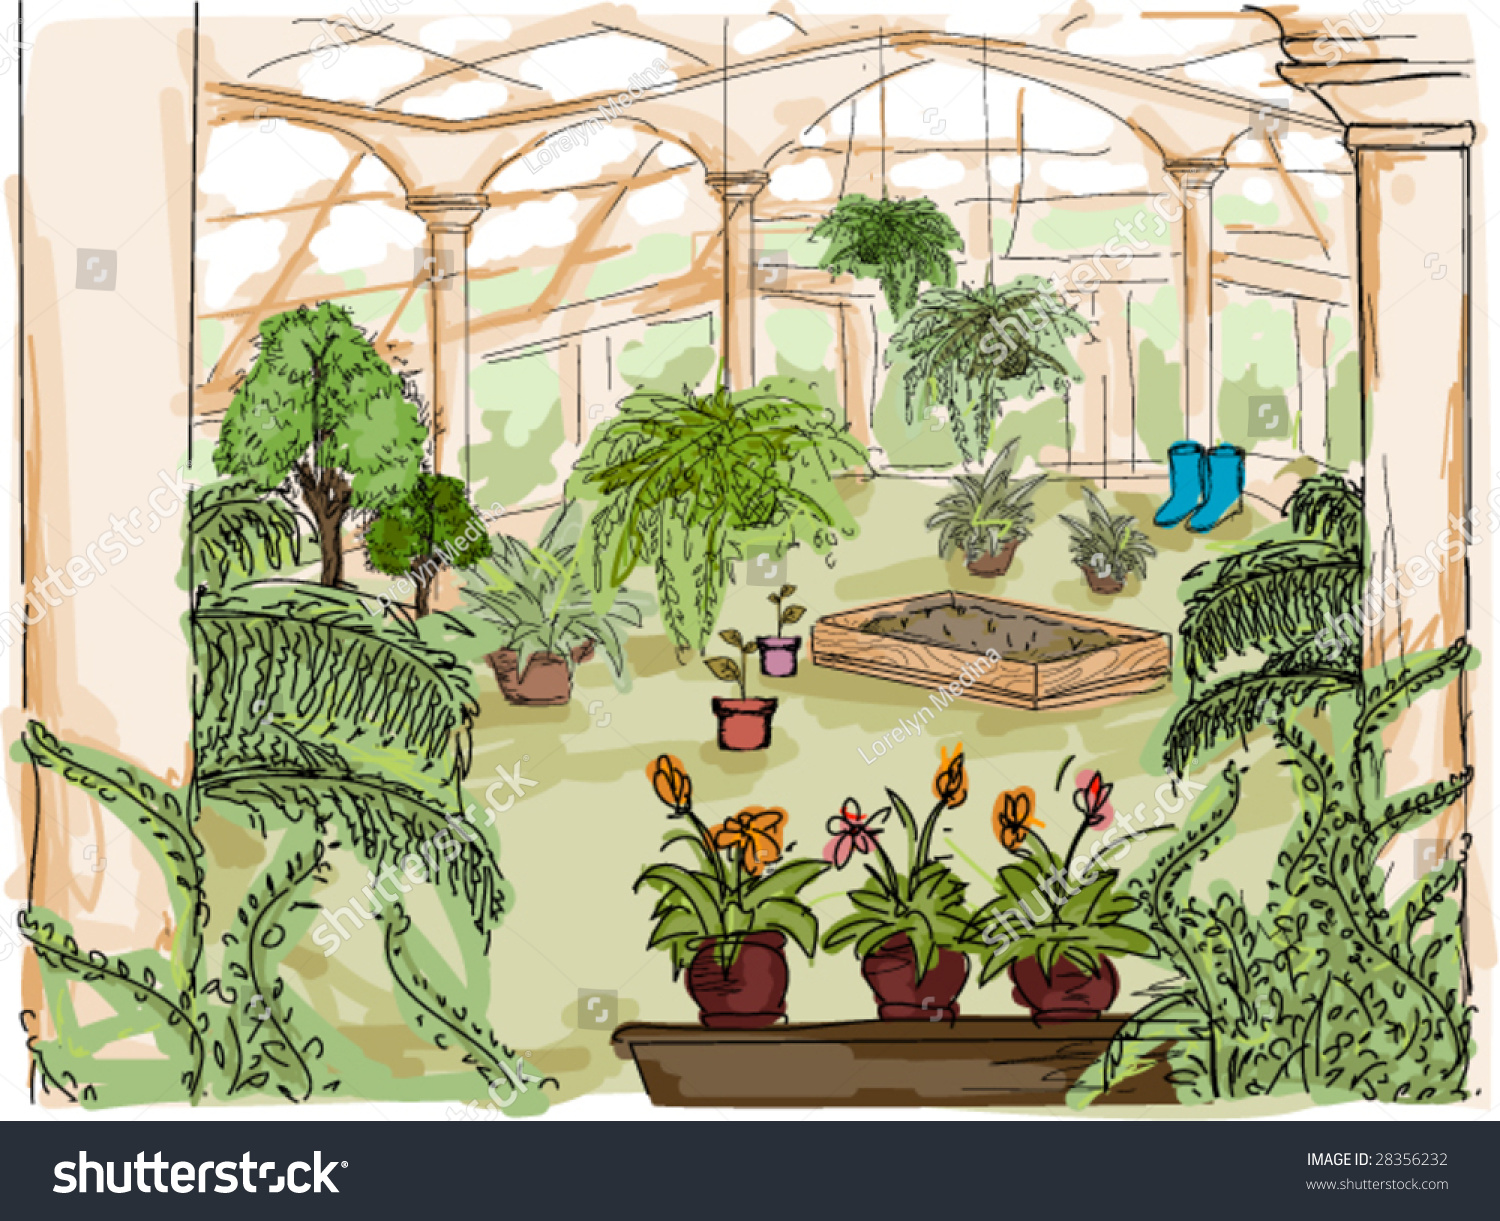 greenhouse clipart - photo #46